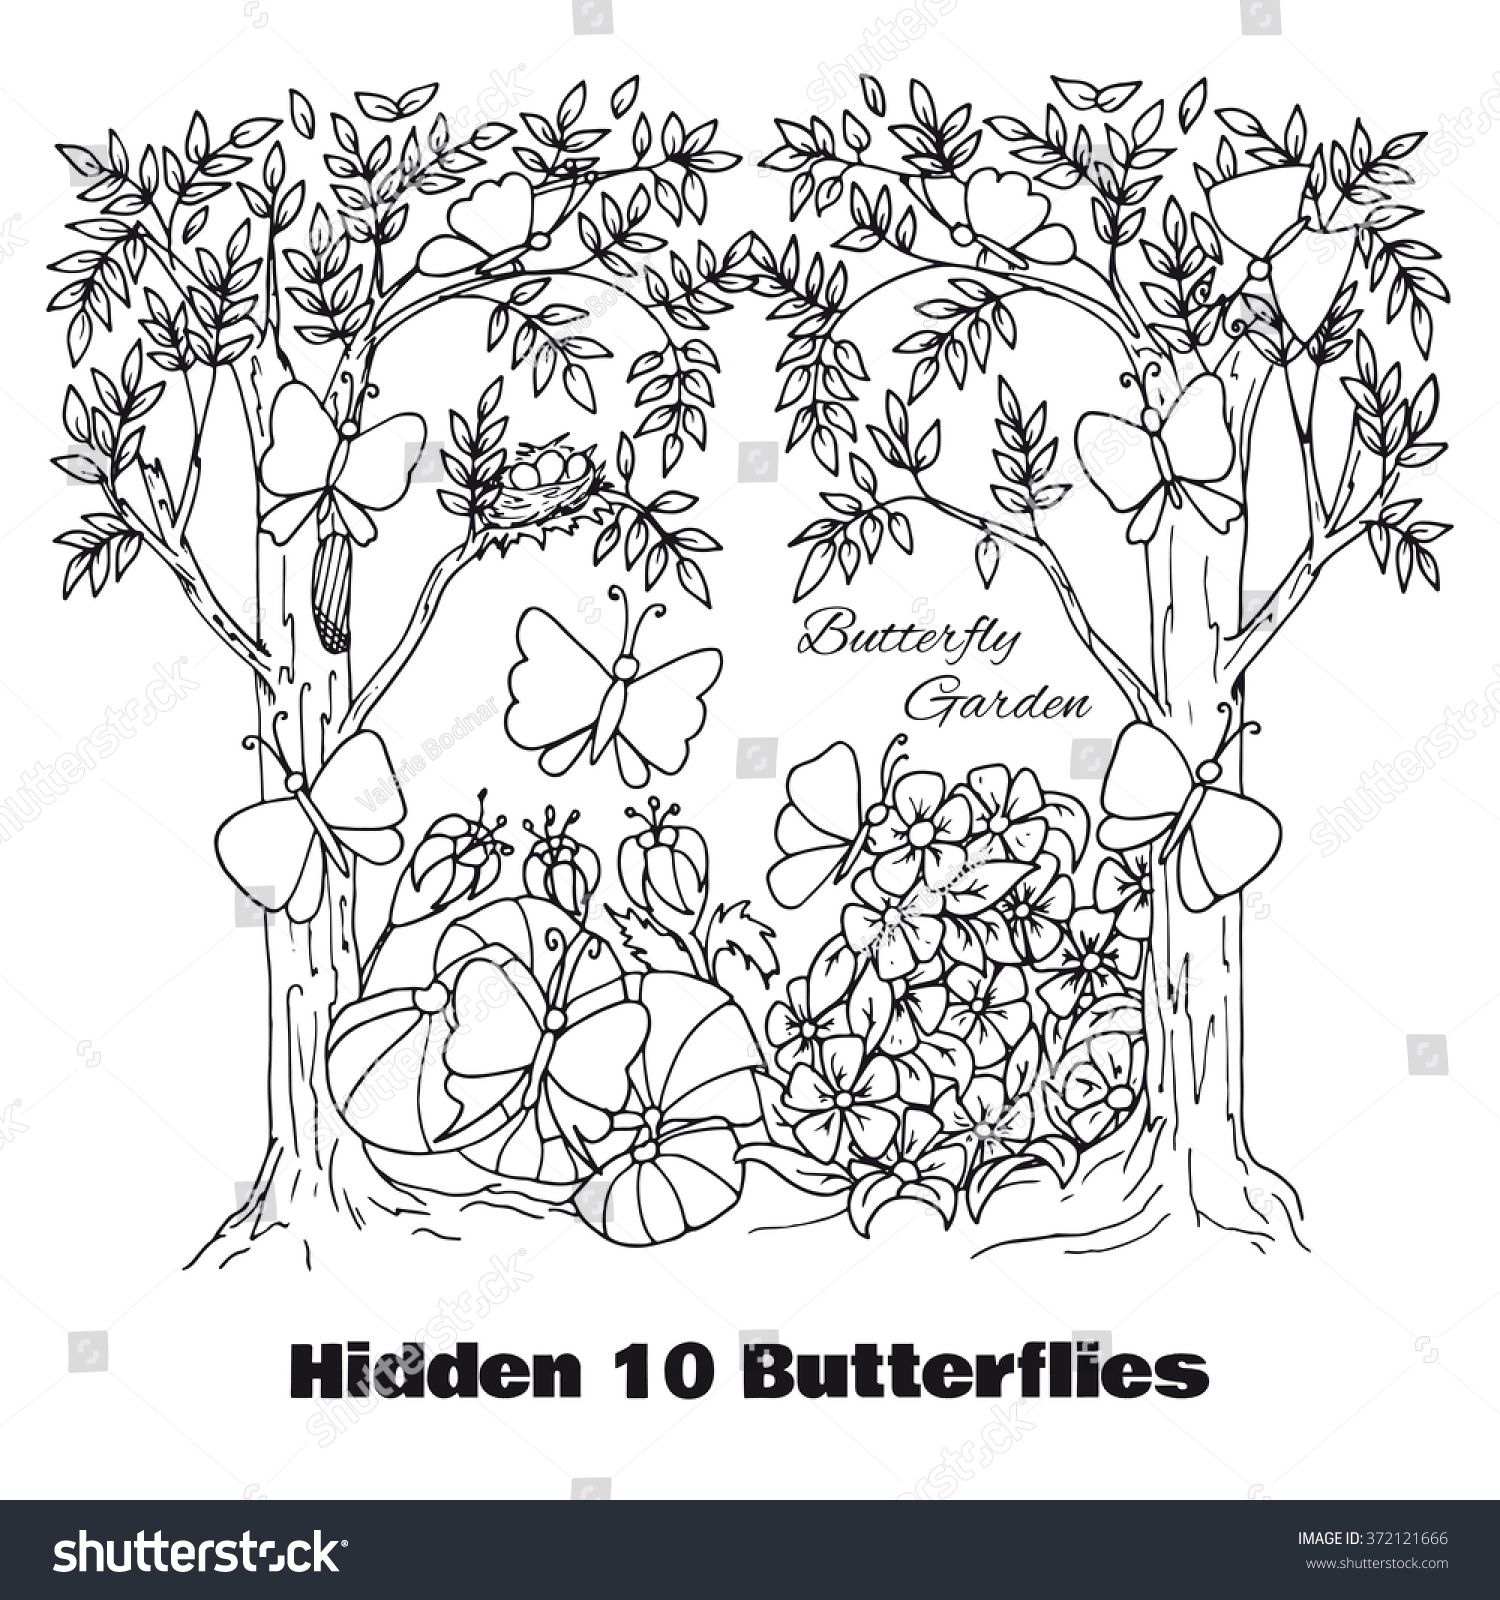 object search coloring pages and find objects - photo #22